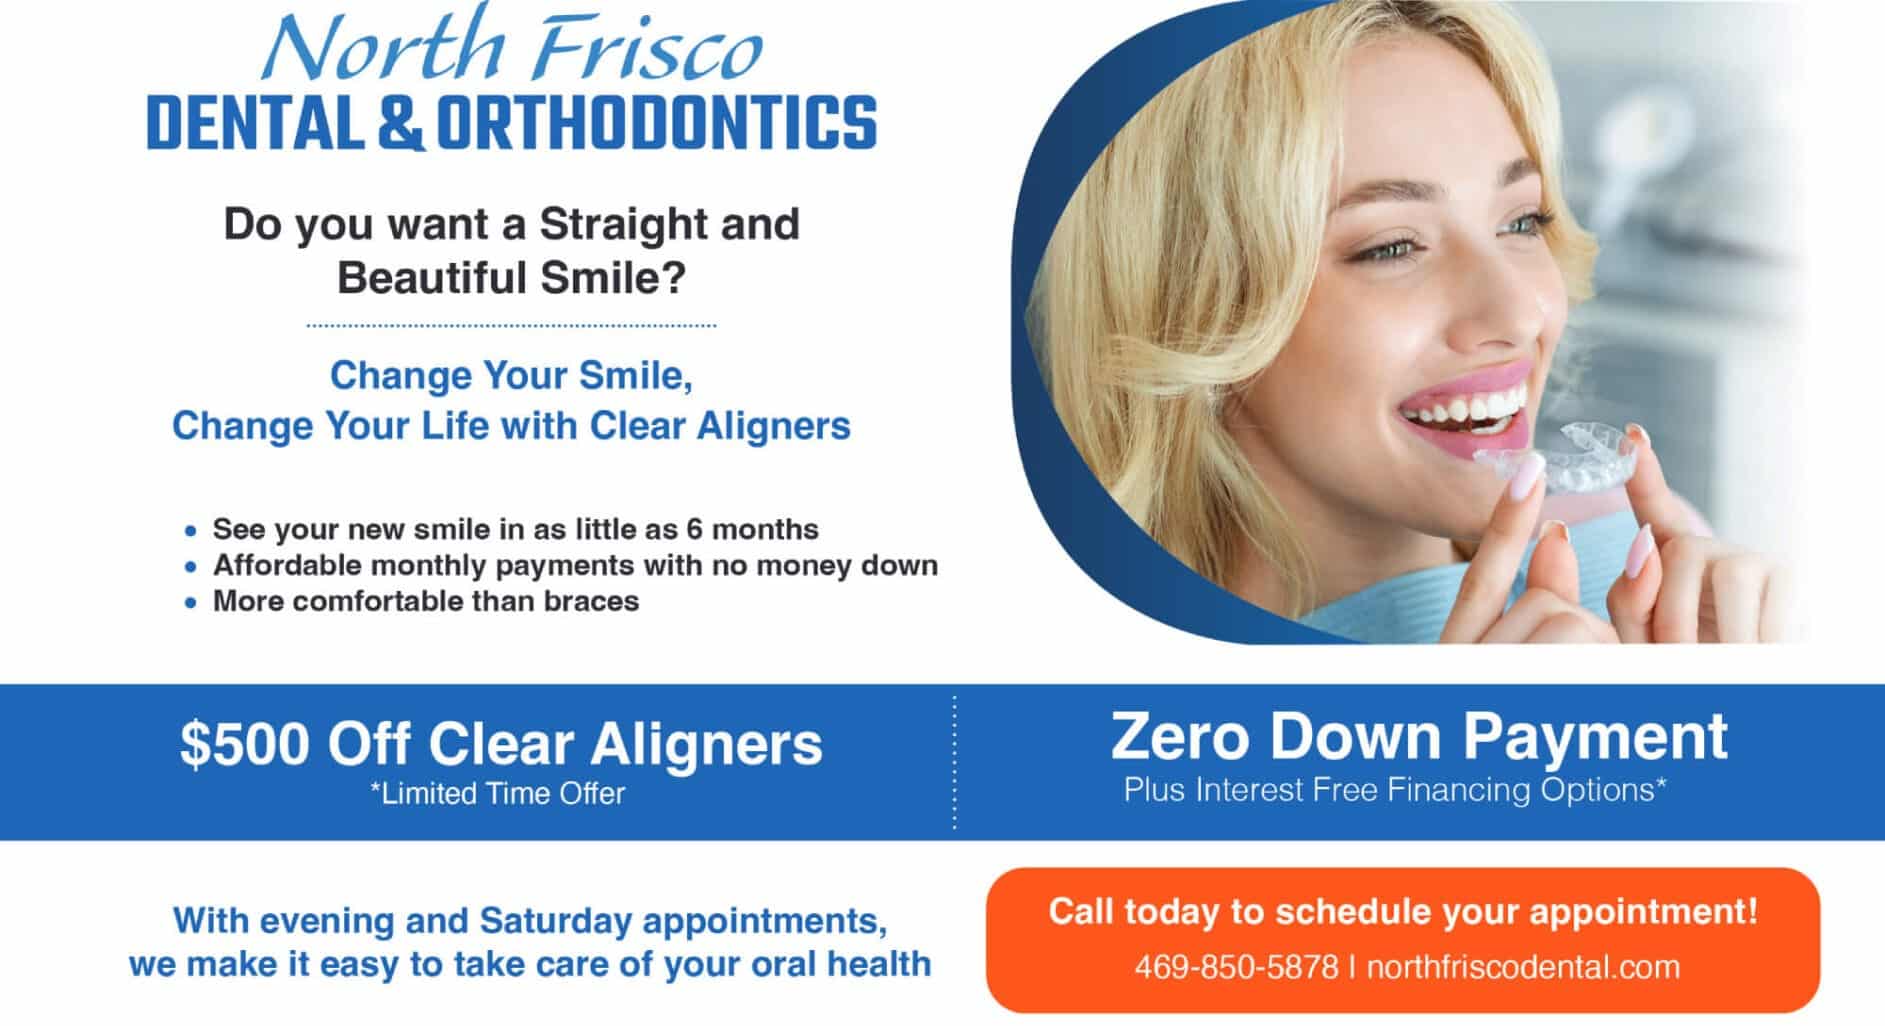 dental and orthodontics in north frisco- north frisco dental & orthodontics